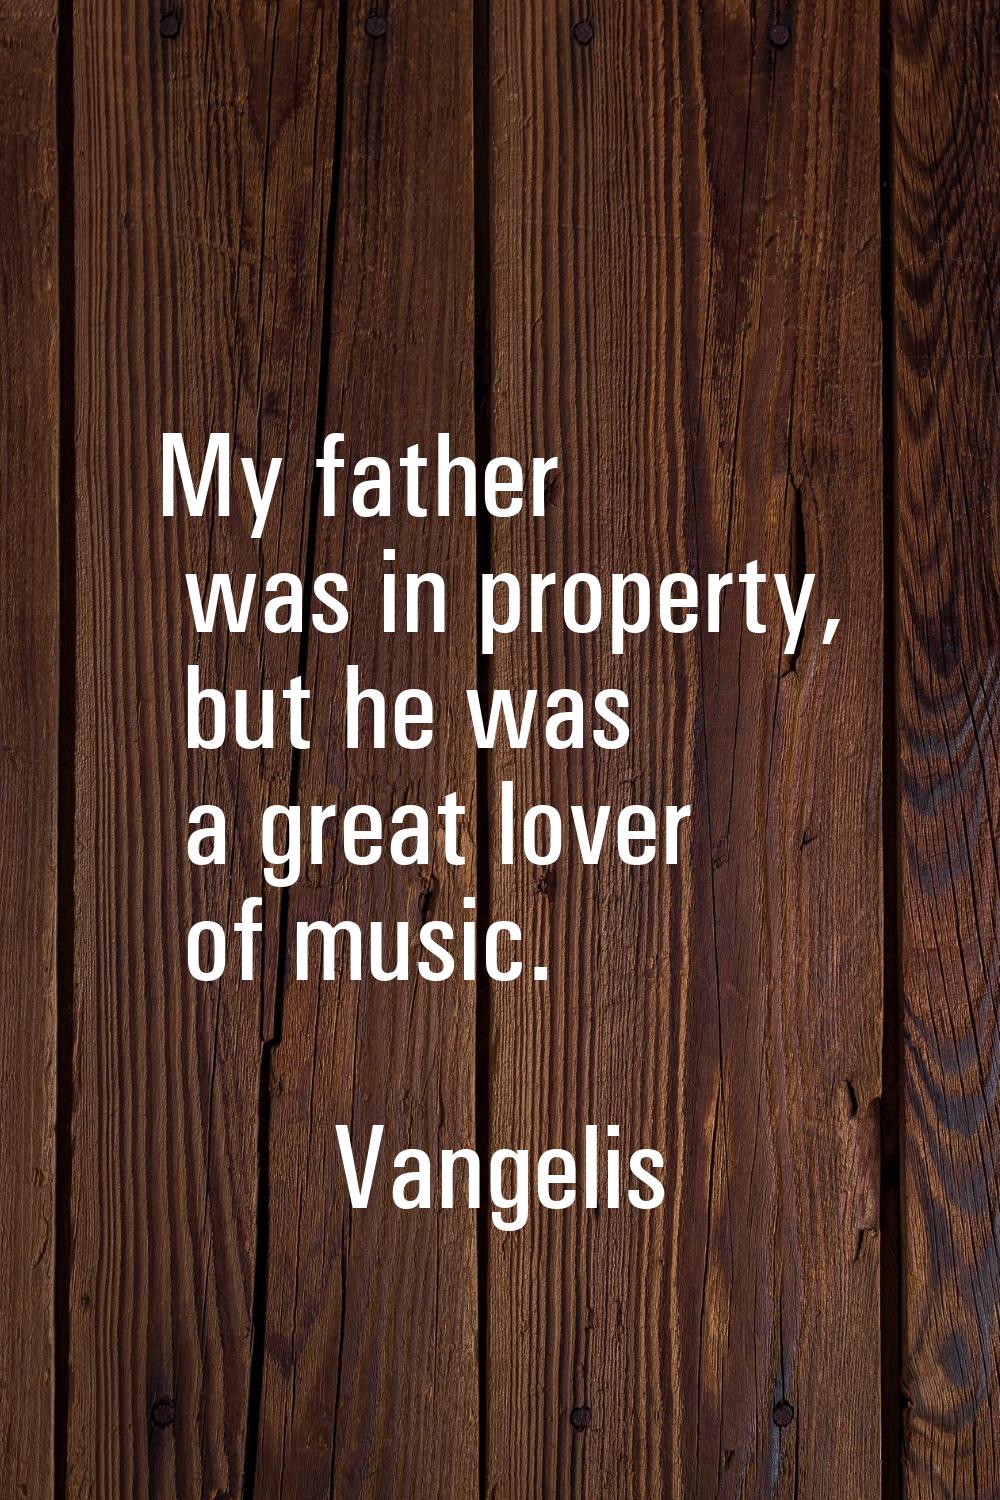 My father was in property, but he was a great lover of music.